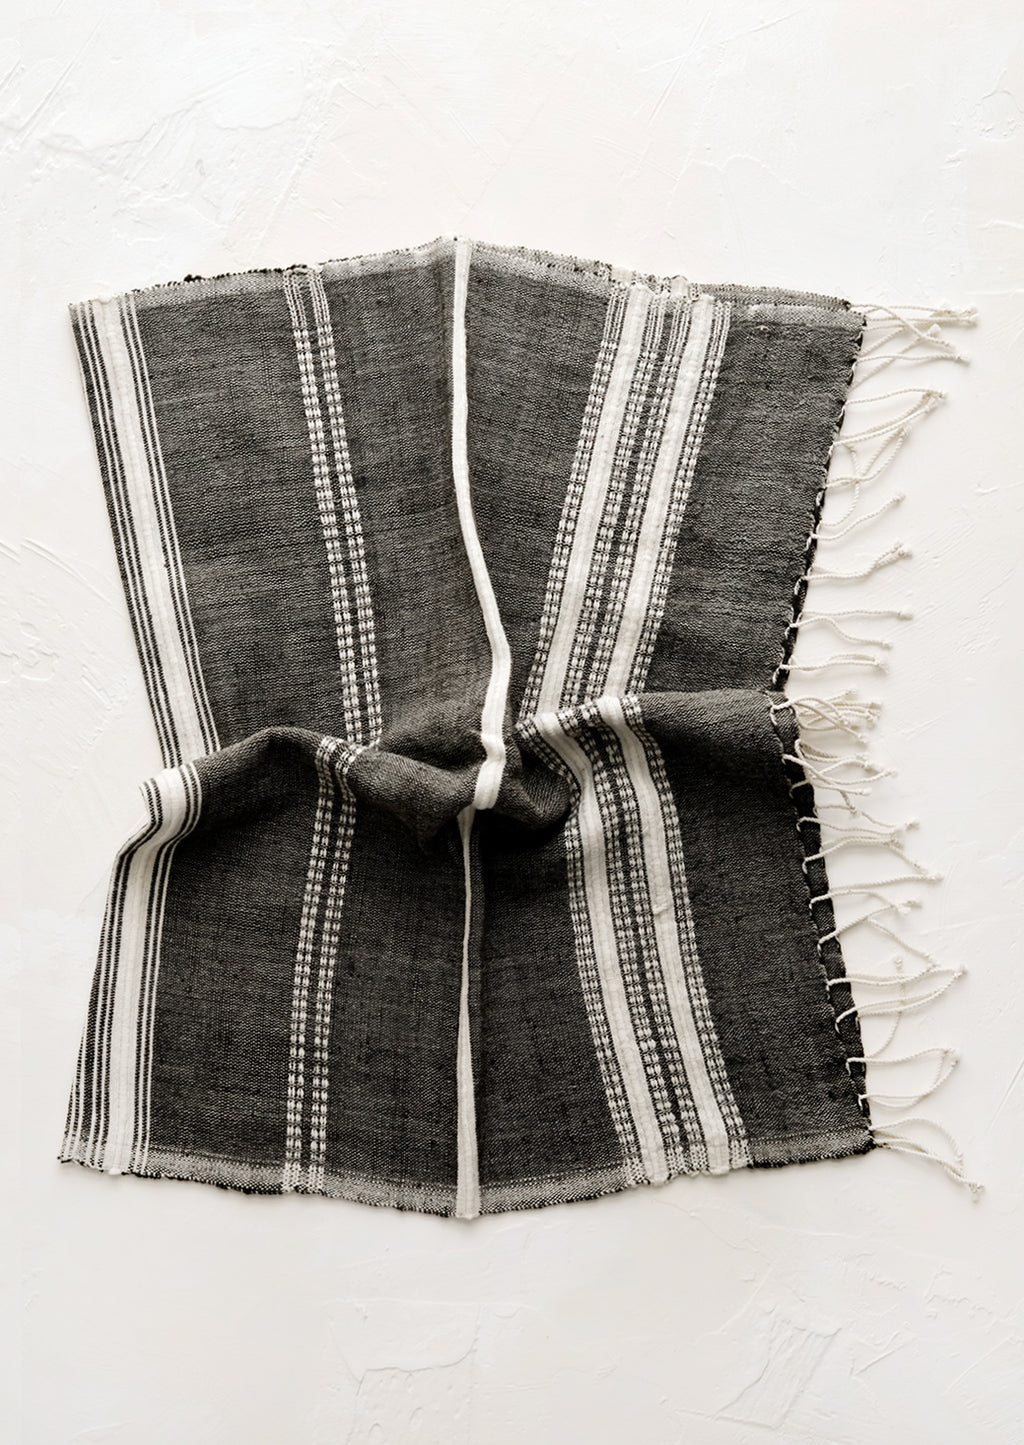 Charcoal: A cotton hand towel in black with woven natural stripes.